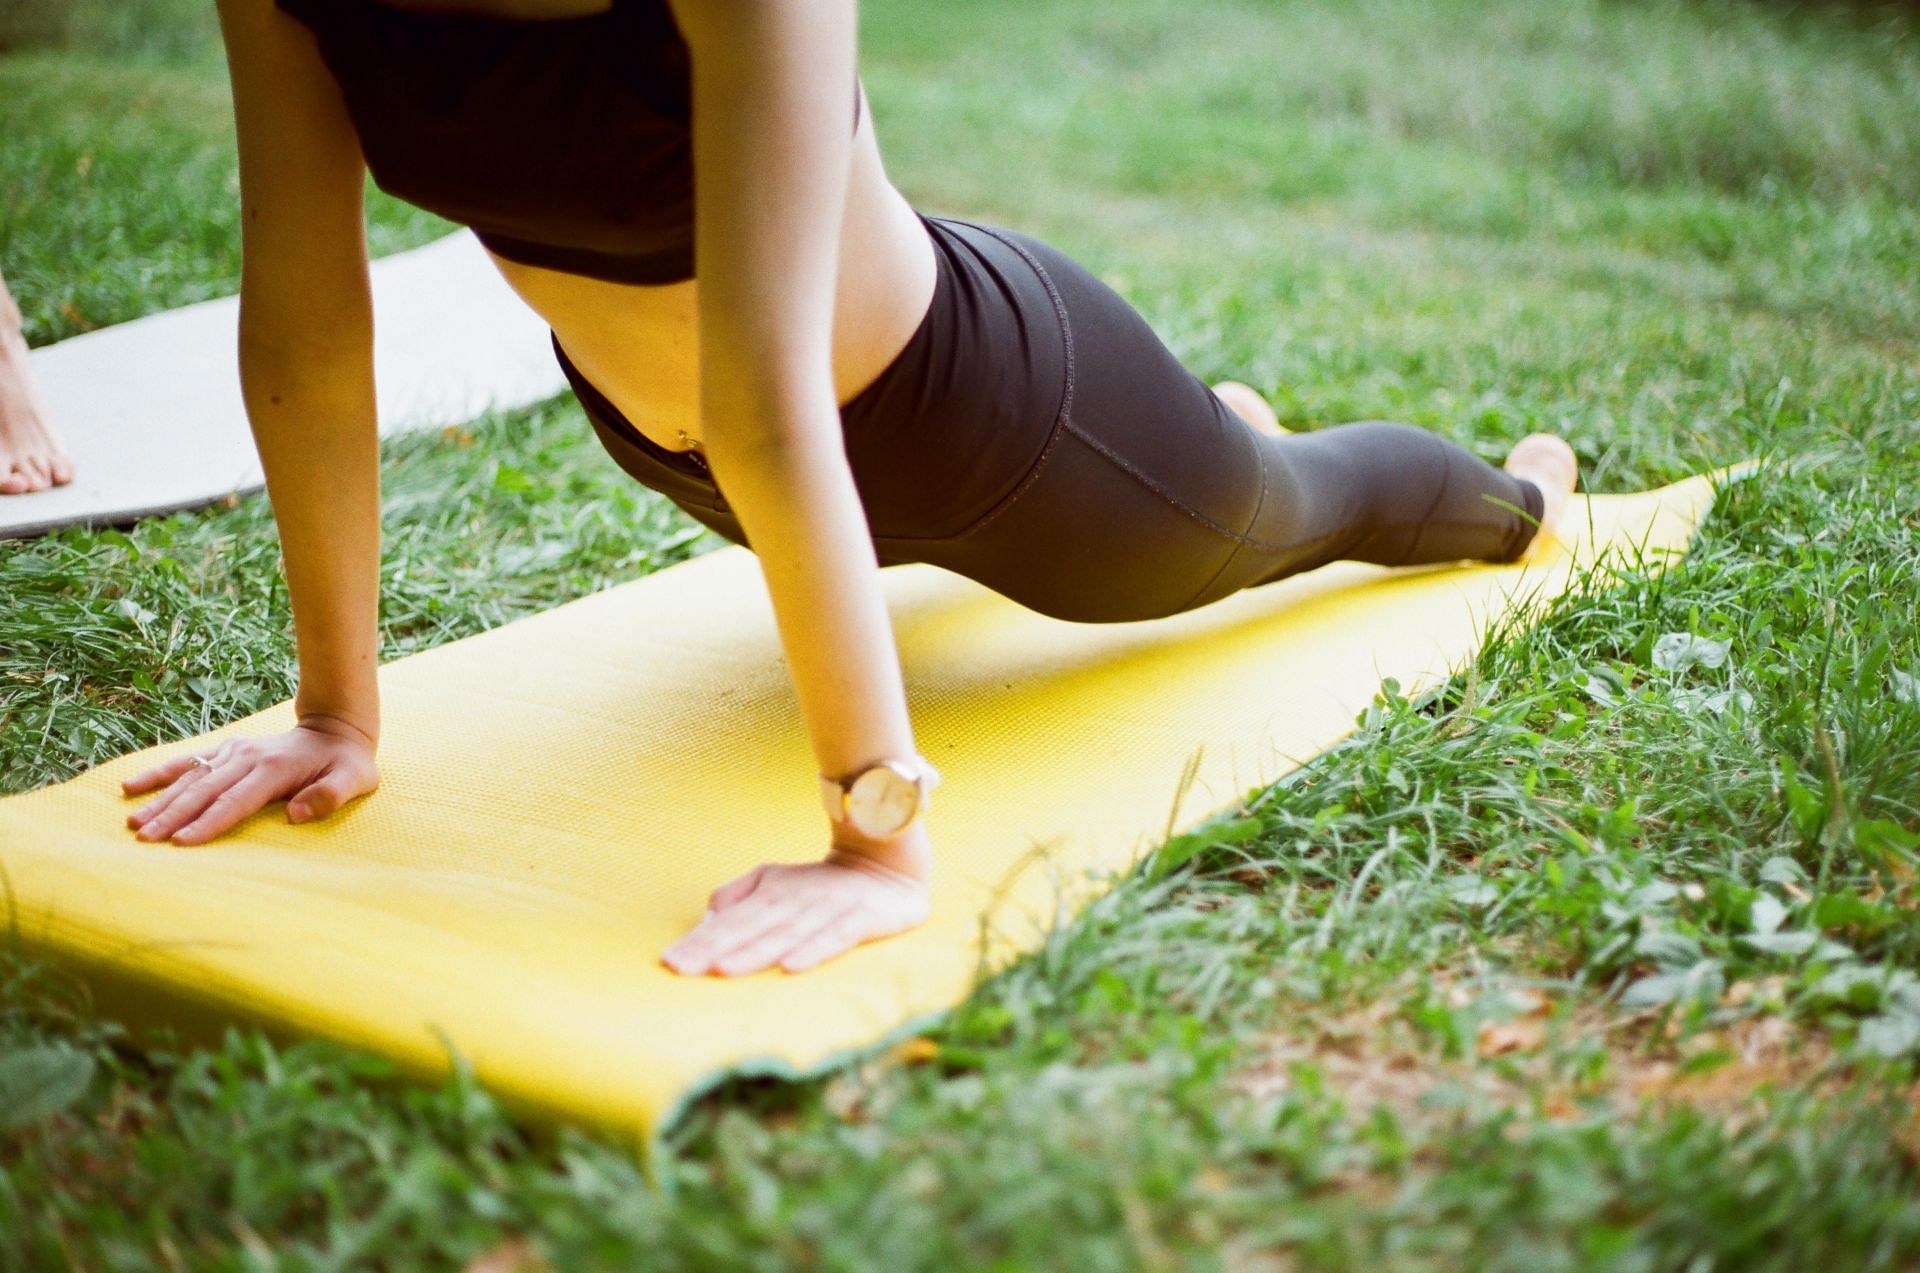 Yoga mats make your practice more stable and secure. (Image via Unsplash/ Hopefilmphoto)